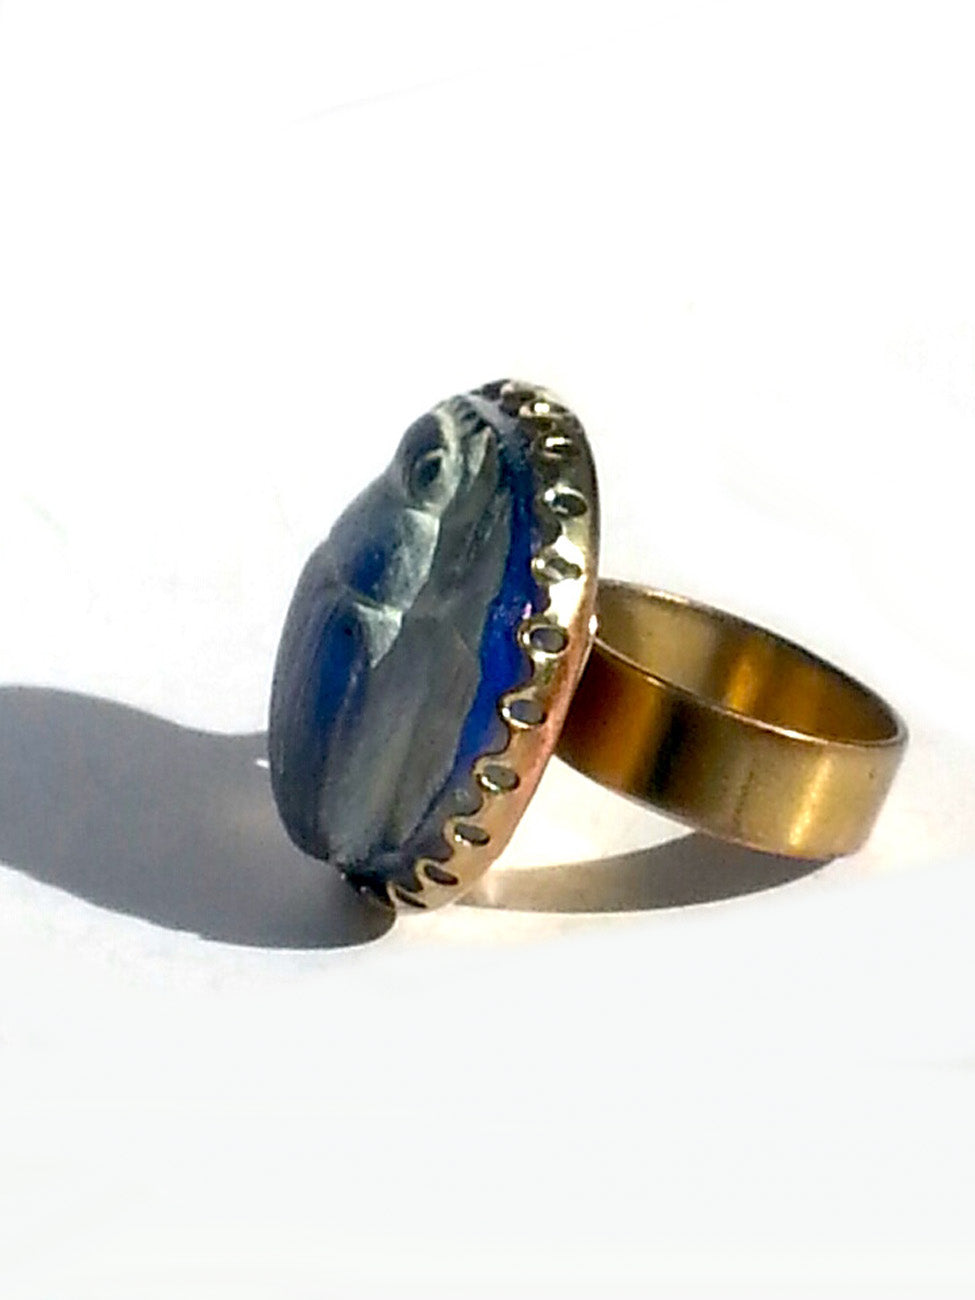 Ring Hand Cast French Glass Beetle Blue